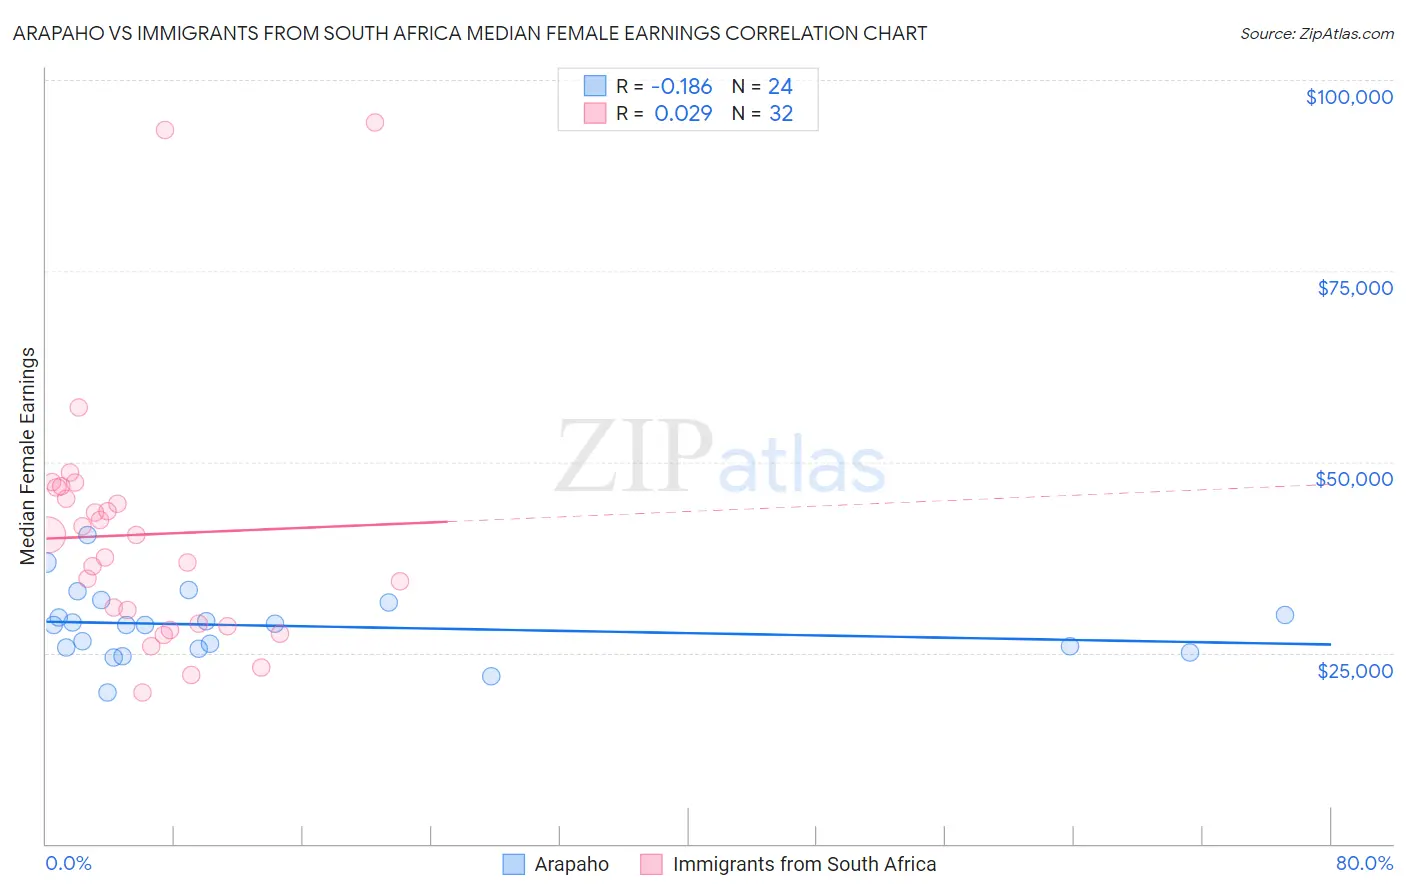 Arapaho vs Immigrants from South Africa Median Female Earnings